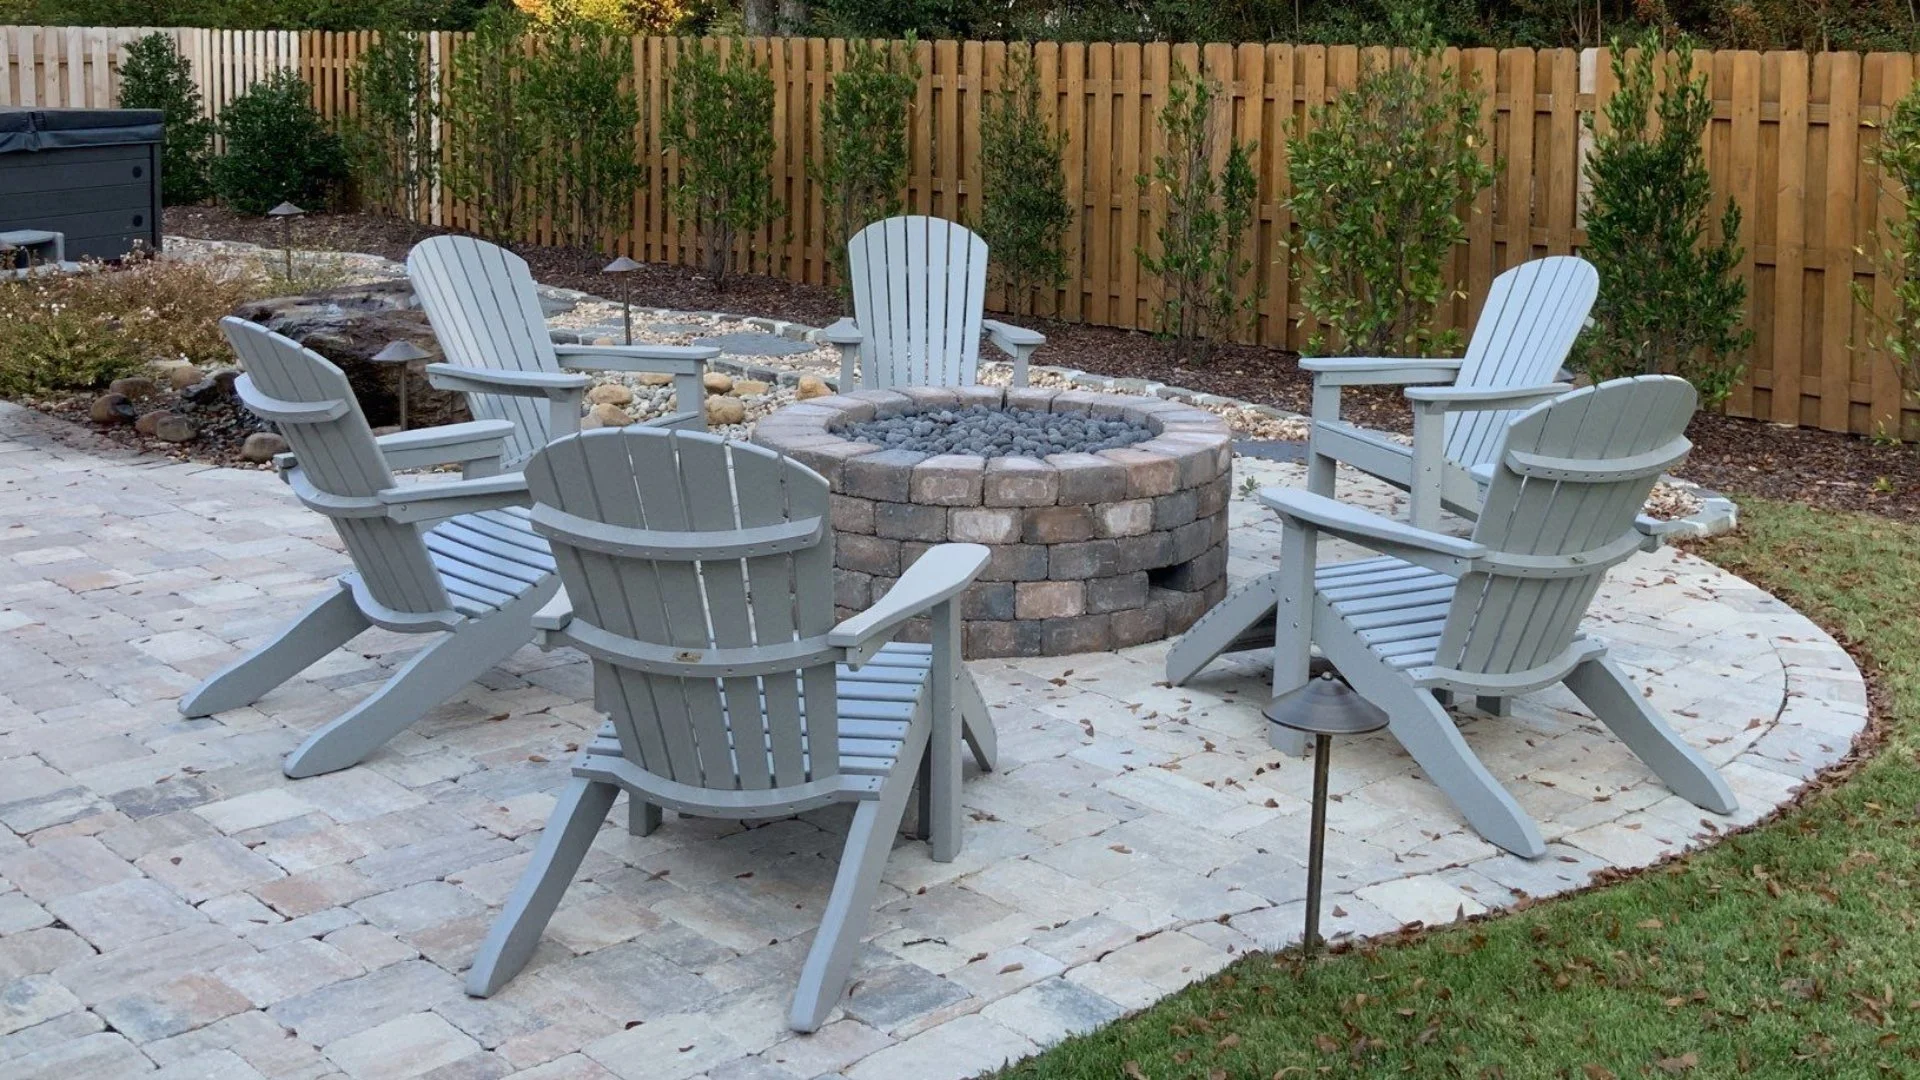 Pros vs Cons of Natural Gas, Wood & Propane-Burning Fire Pits